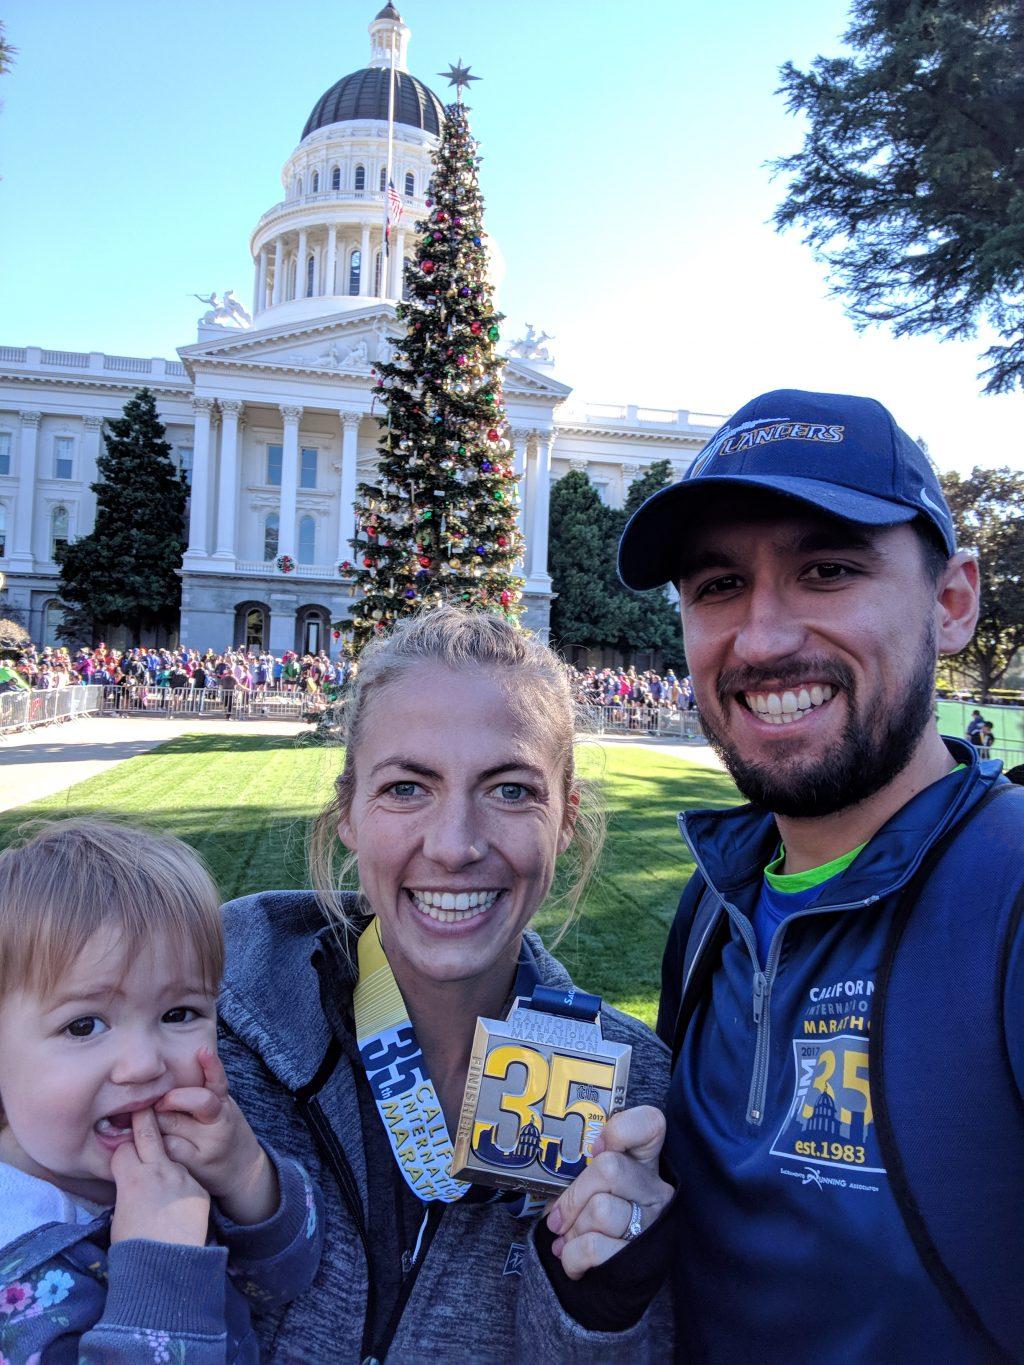 Floris, flanked by her daughter Liv and husband Henri, shows off her CIM medal in front of the California State Capitol in Sacramento. Floris' 2017 CIM race remains her personal best in a marathon.